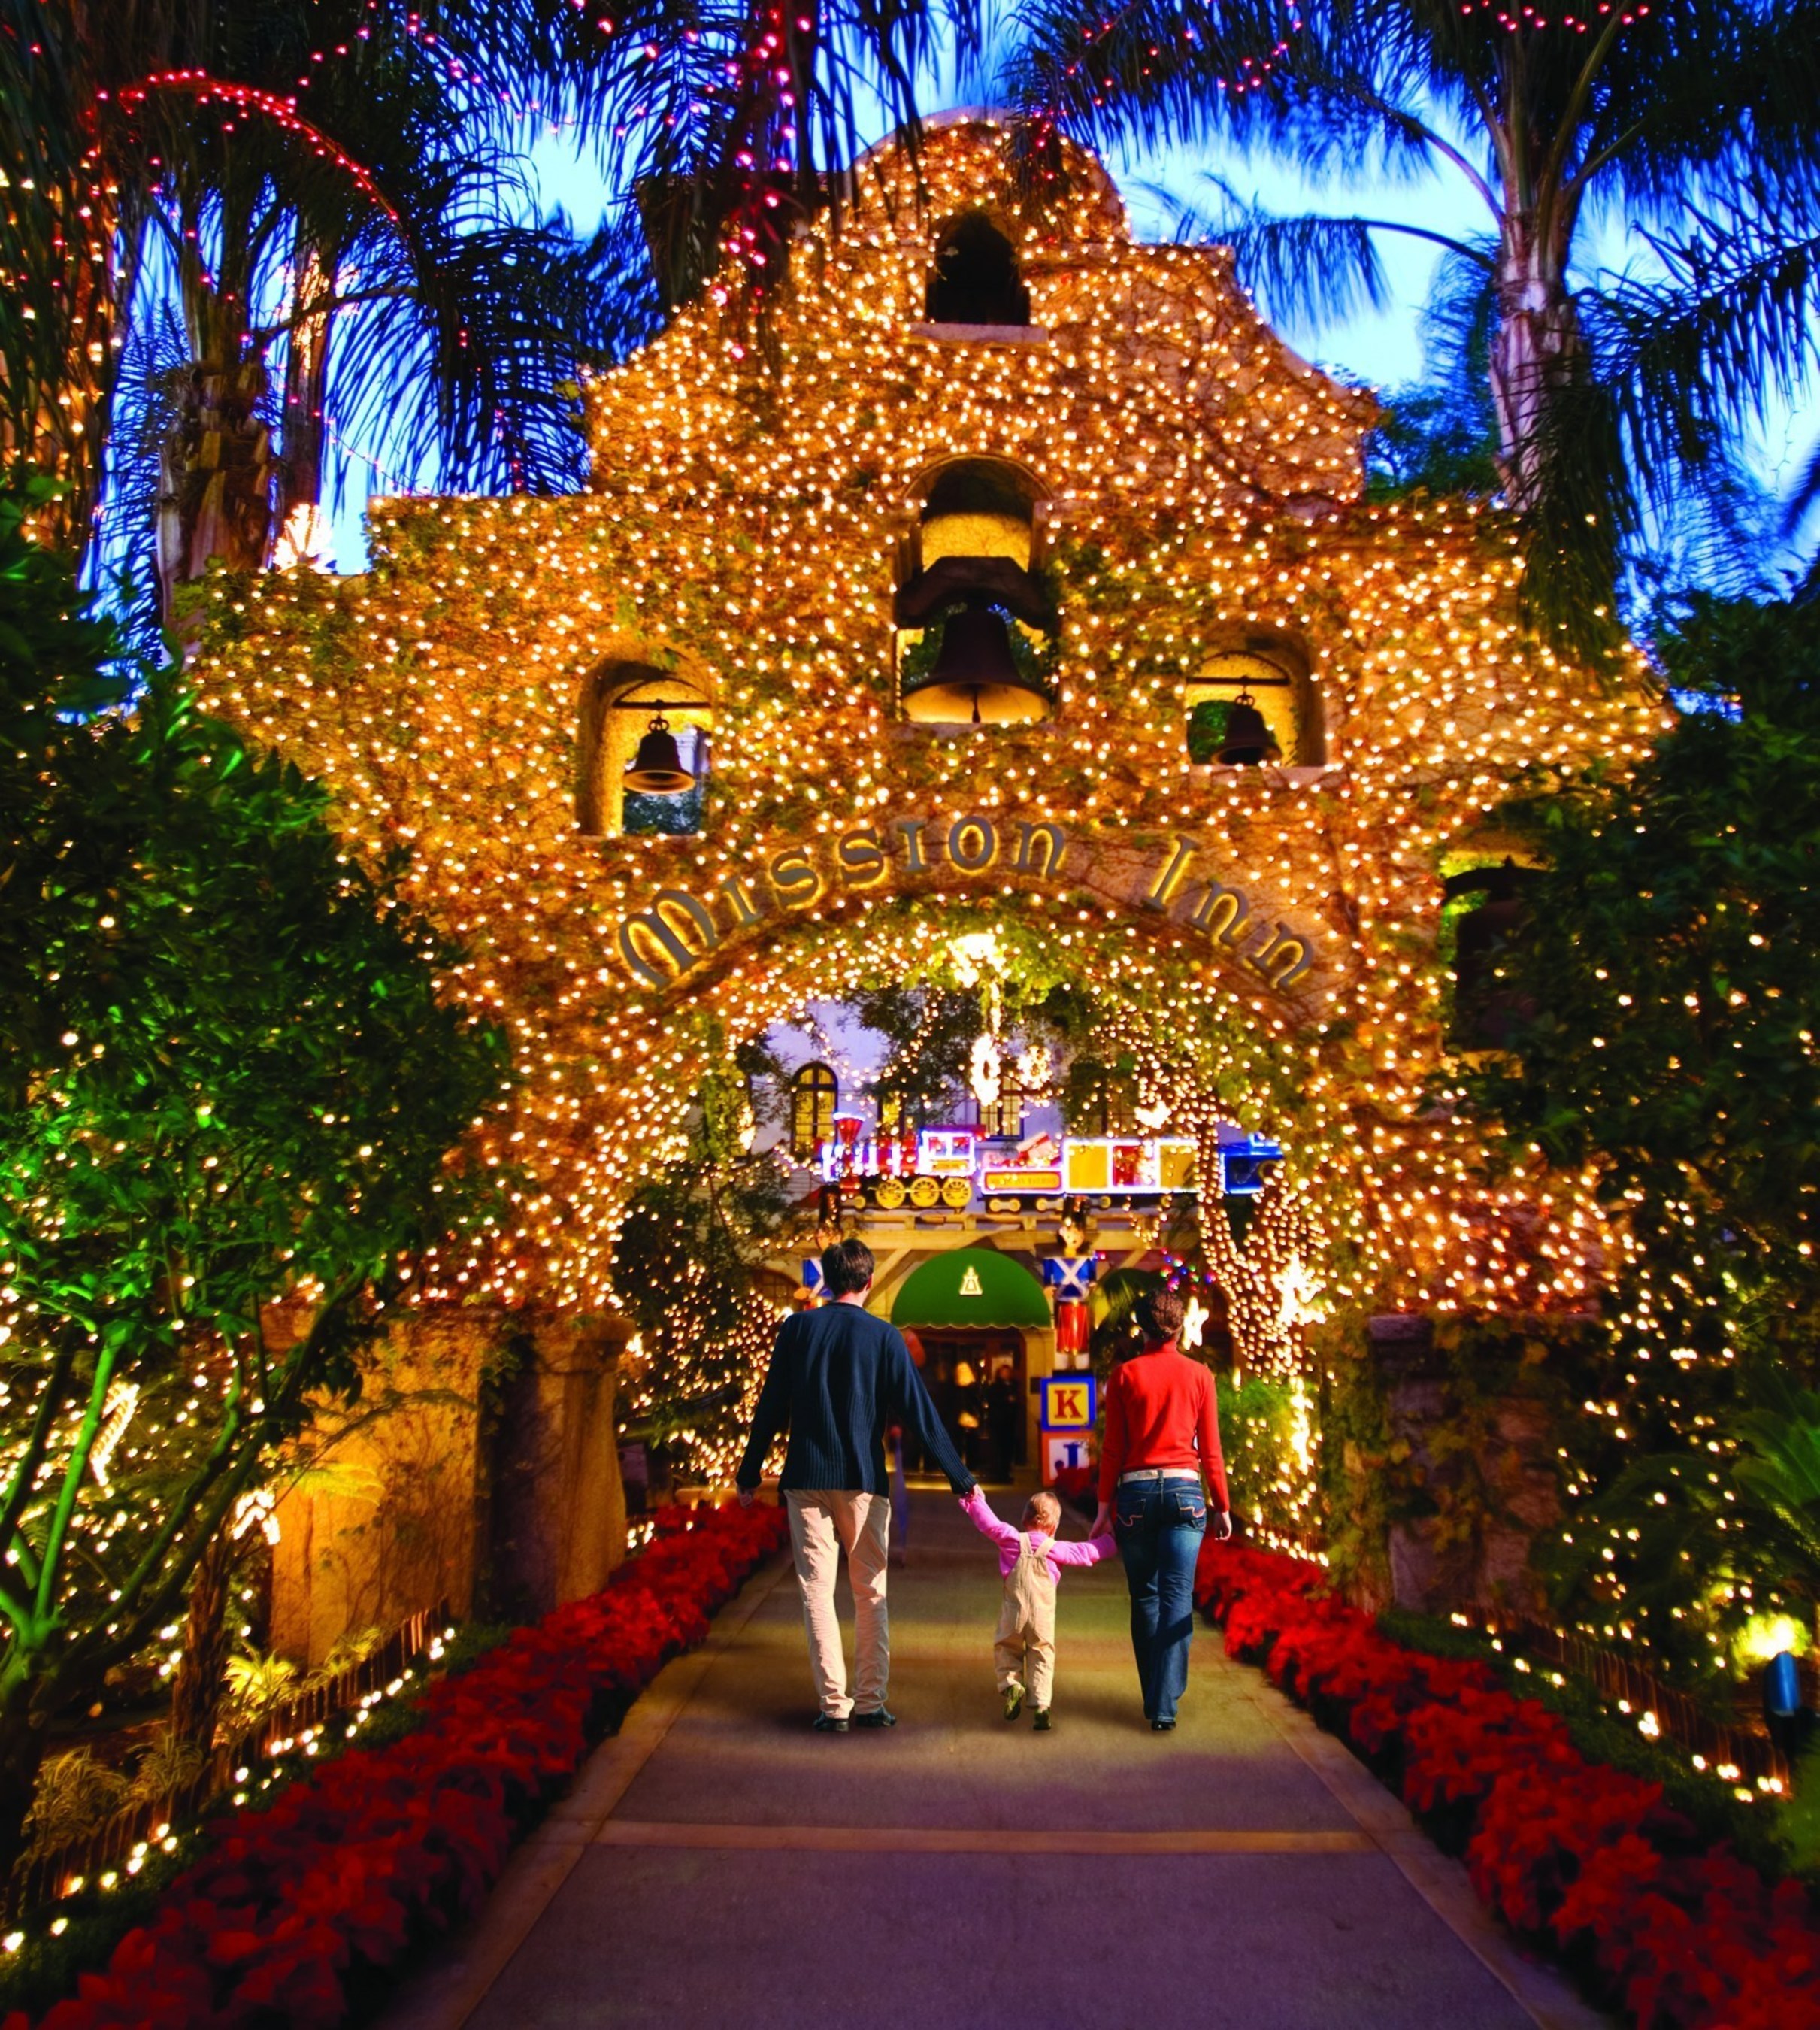 The AAA Four Diamond Historic Mission Inn Hotel & Spa's 22nd Annual Festival of Lights